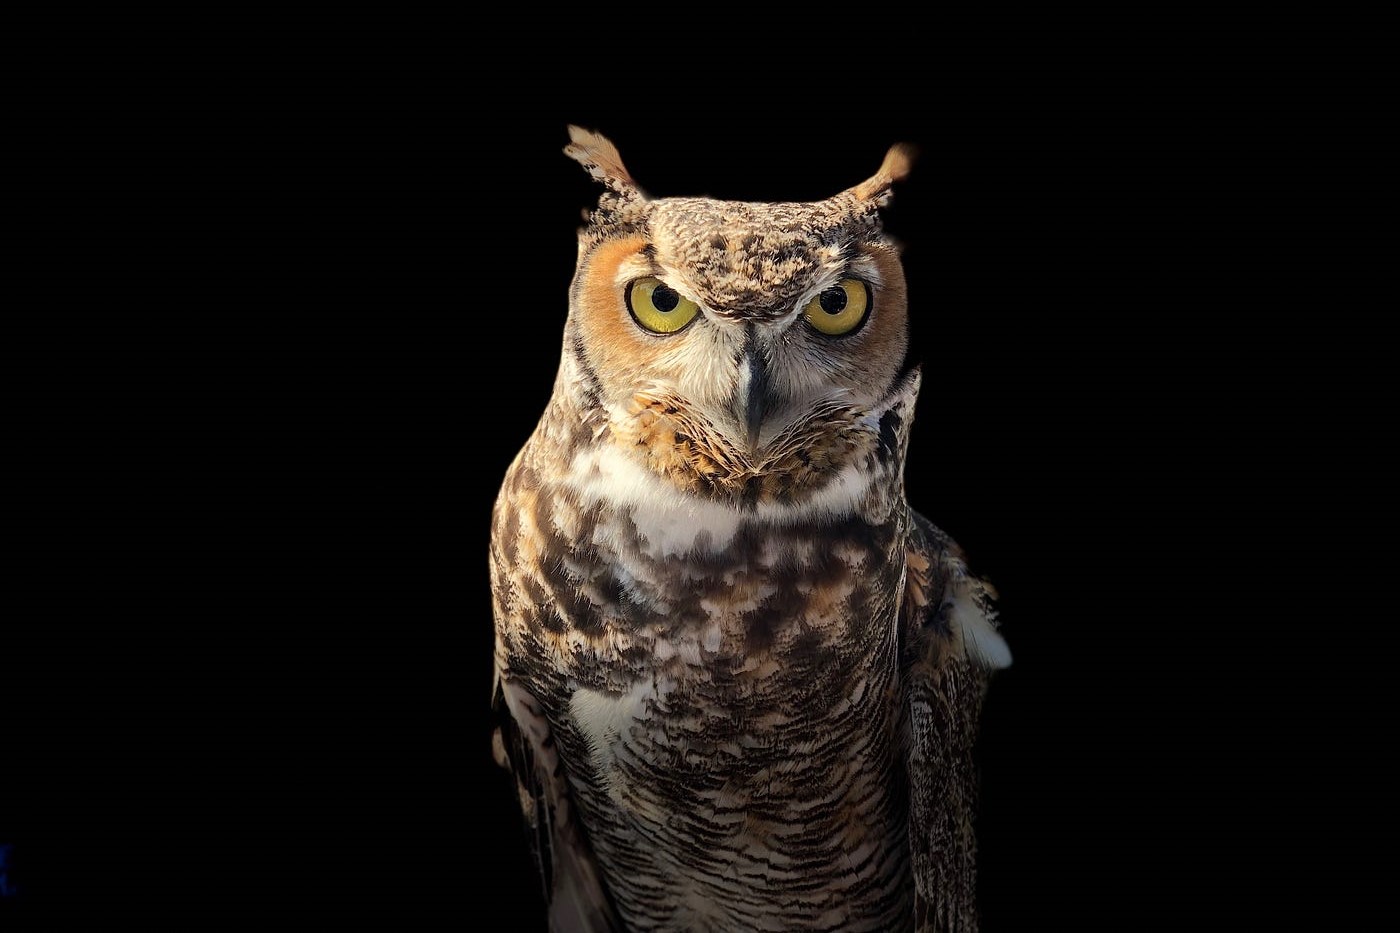 The Hidden Symbolism Behind Spotting An Owl At Night